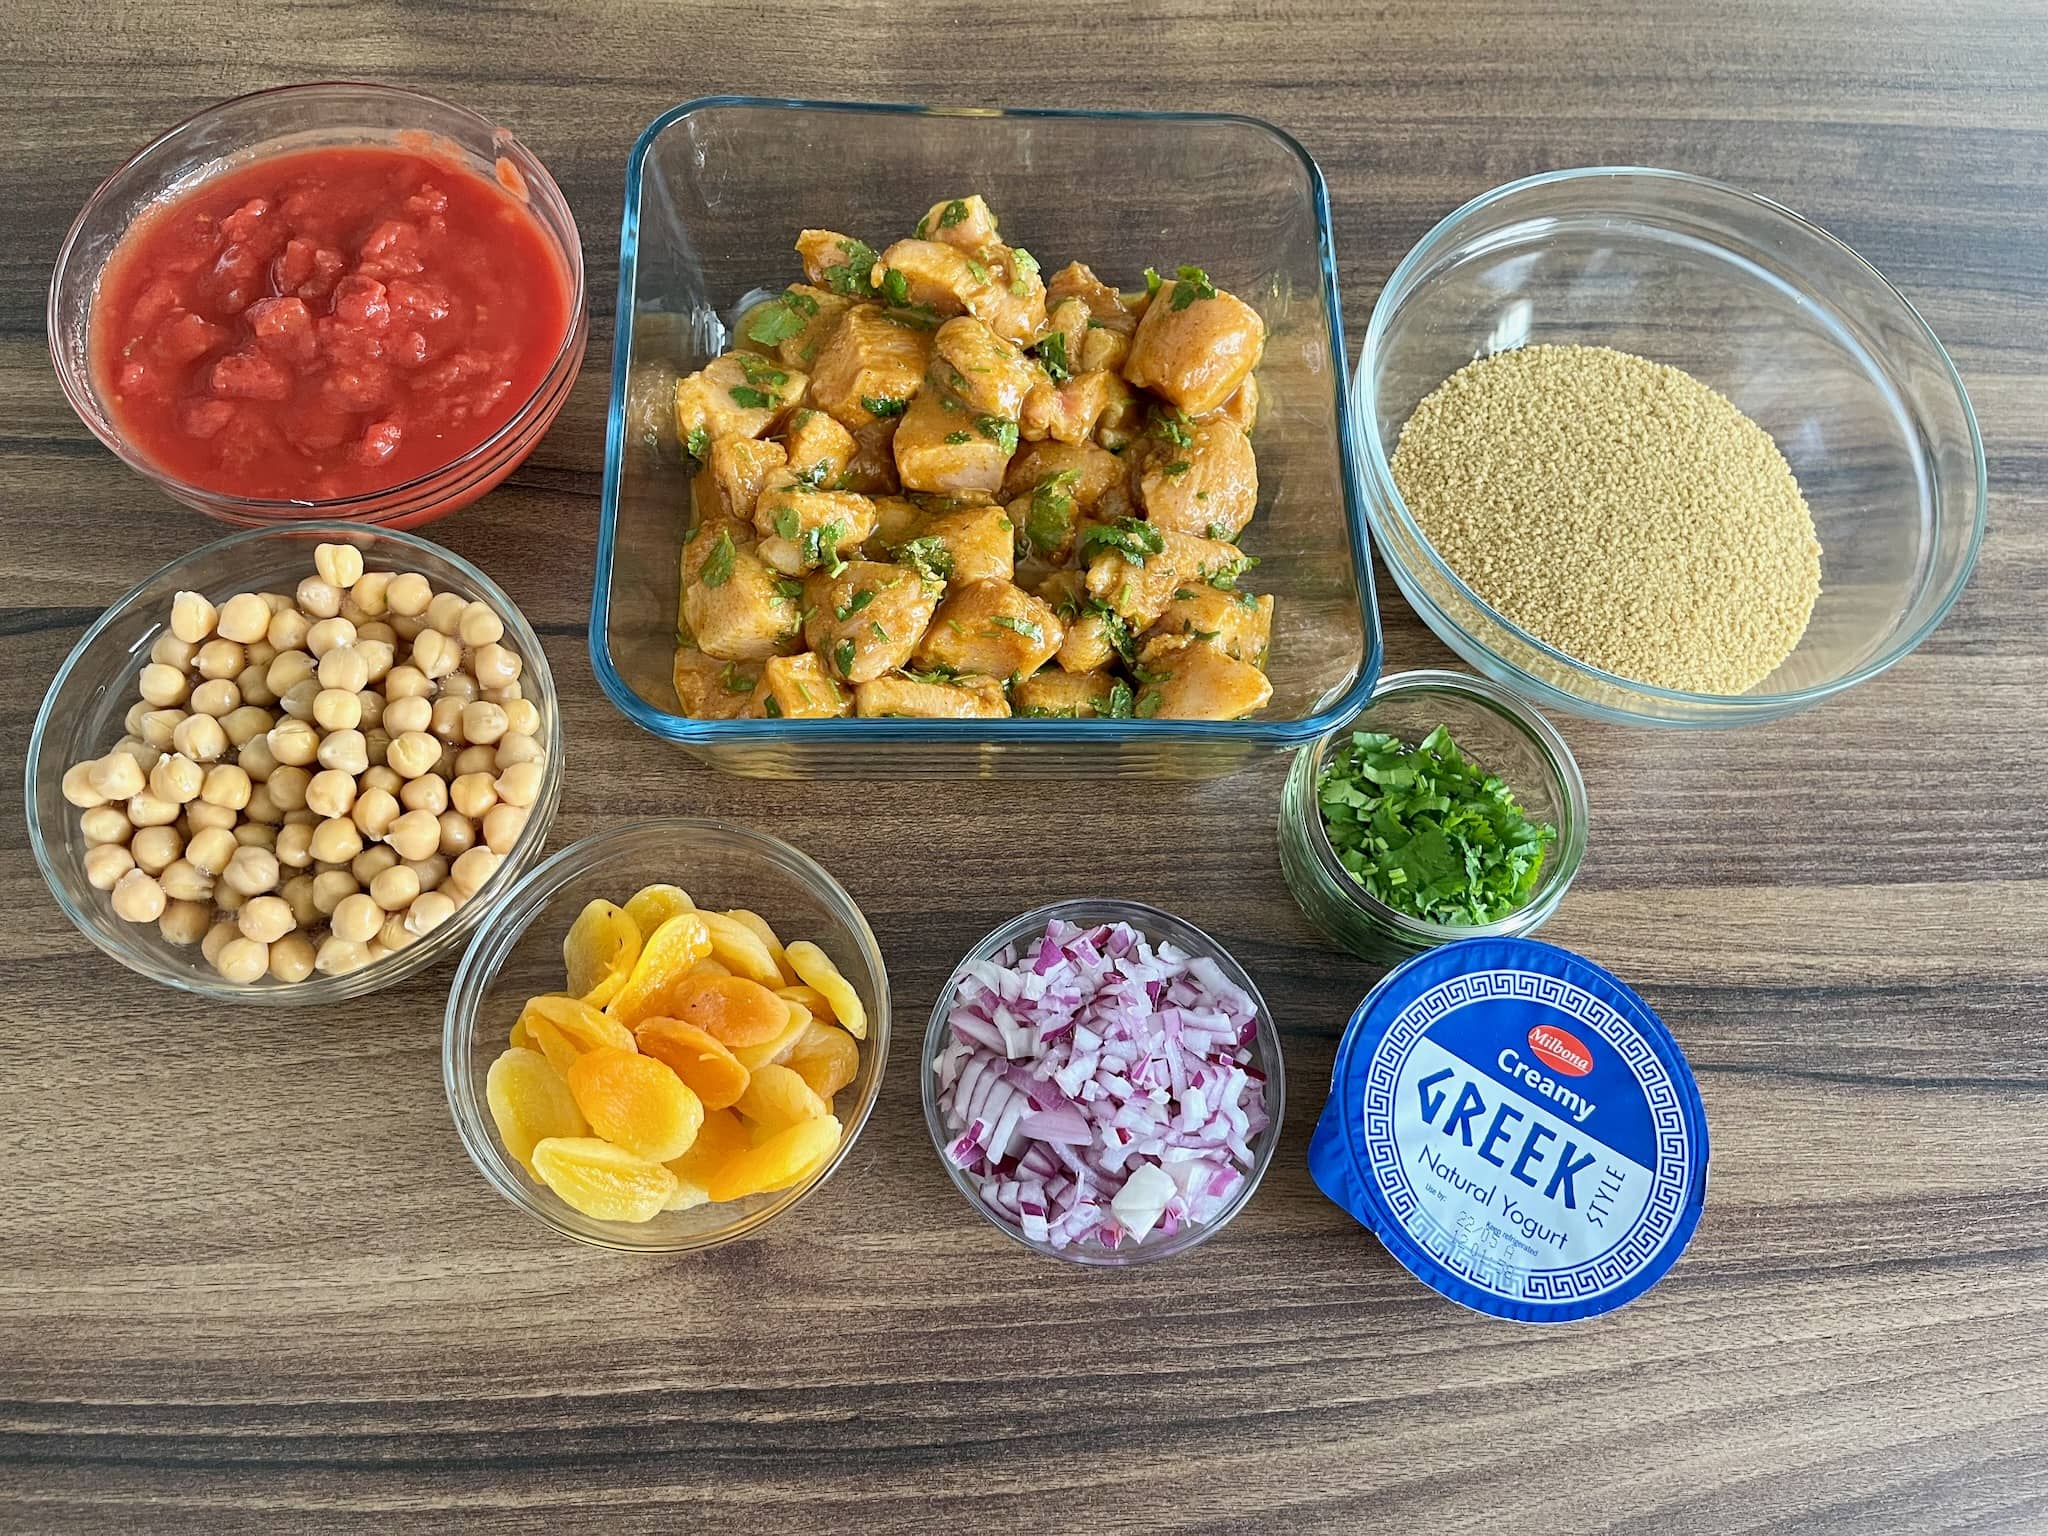 Chopped tomatoes, chicken, couscous, chickpeas, apricots, onion, coriander, greek style yoghurt